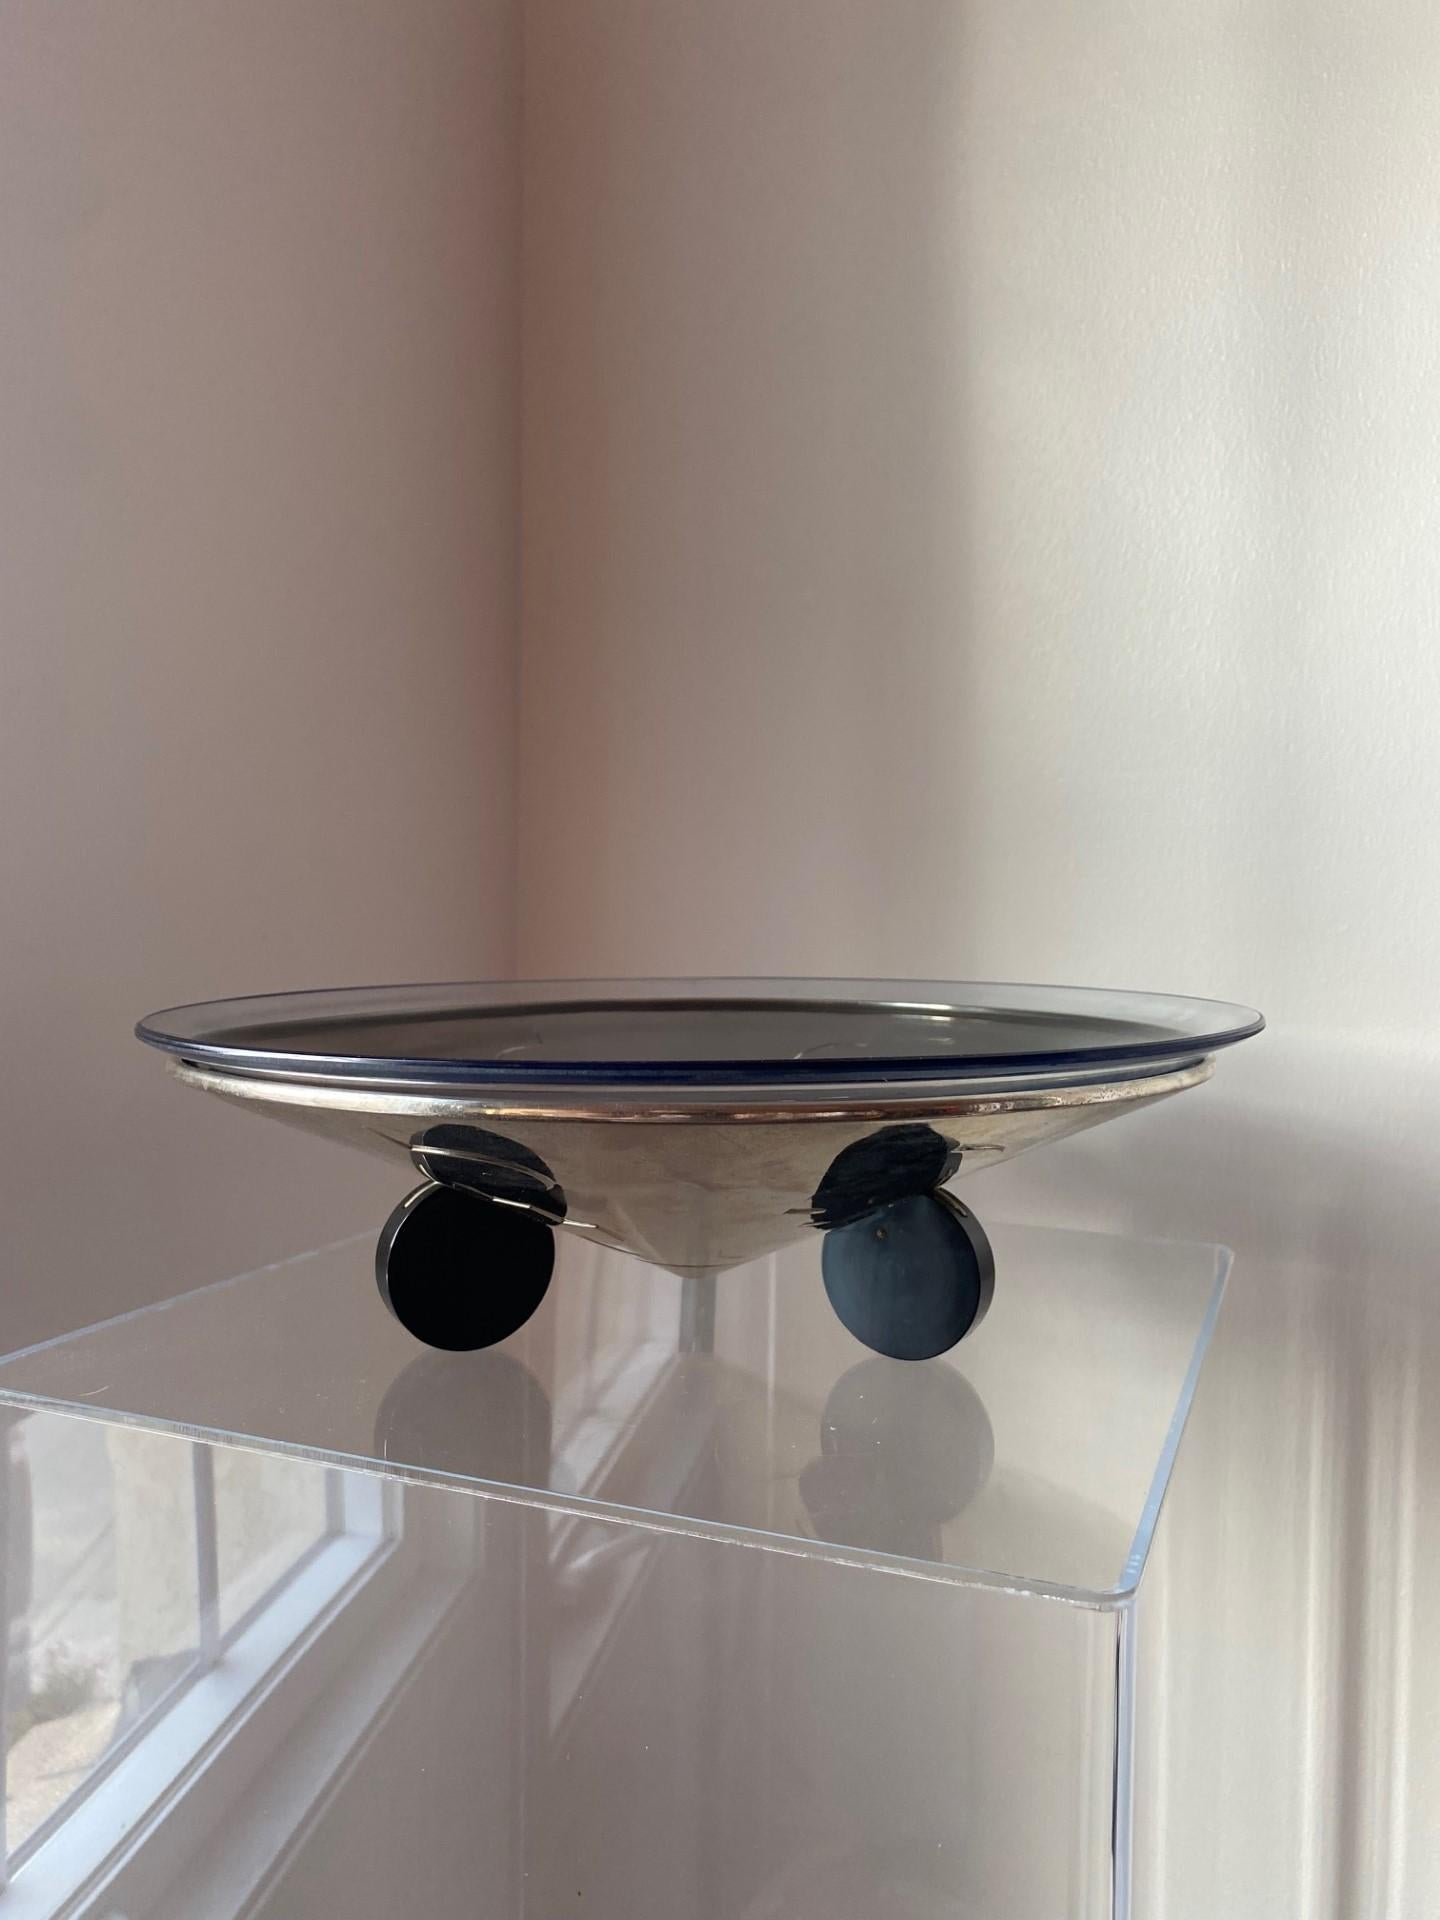 This beautiful art deco decorative bowl is sublime and unique.  This piece originates from the 1930’s and came from an estate of an avid art deco collector. The silver plated bowl in chrome finish has a puzzle like design. The bowl is suspended over